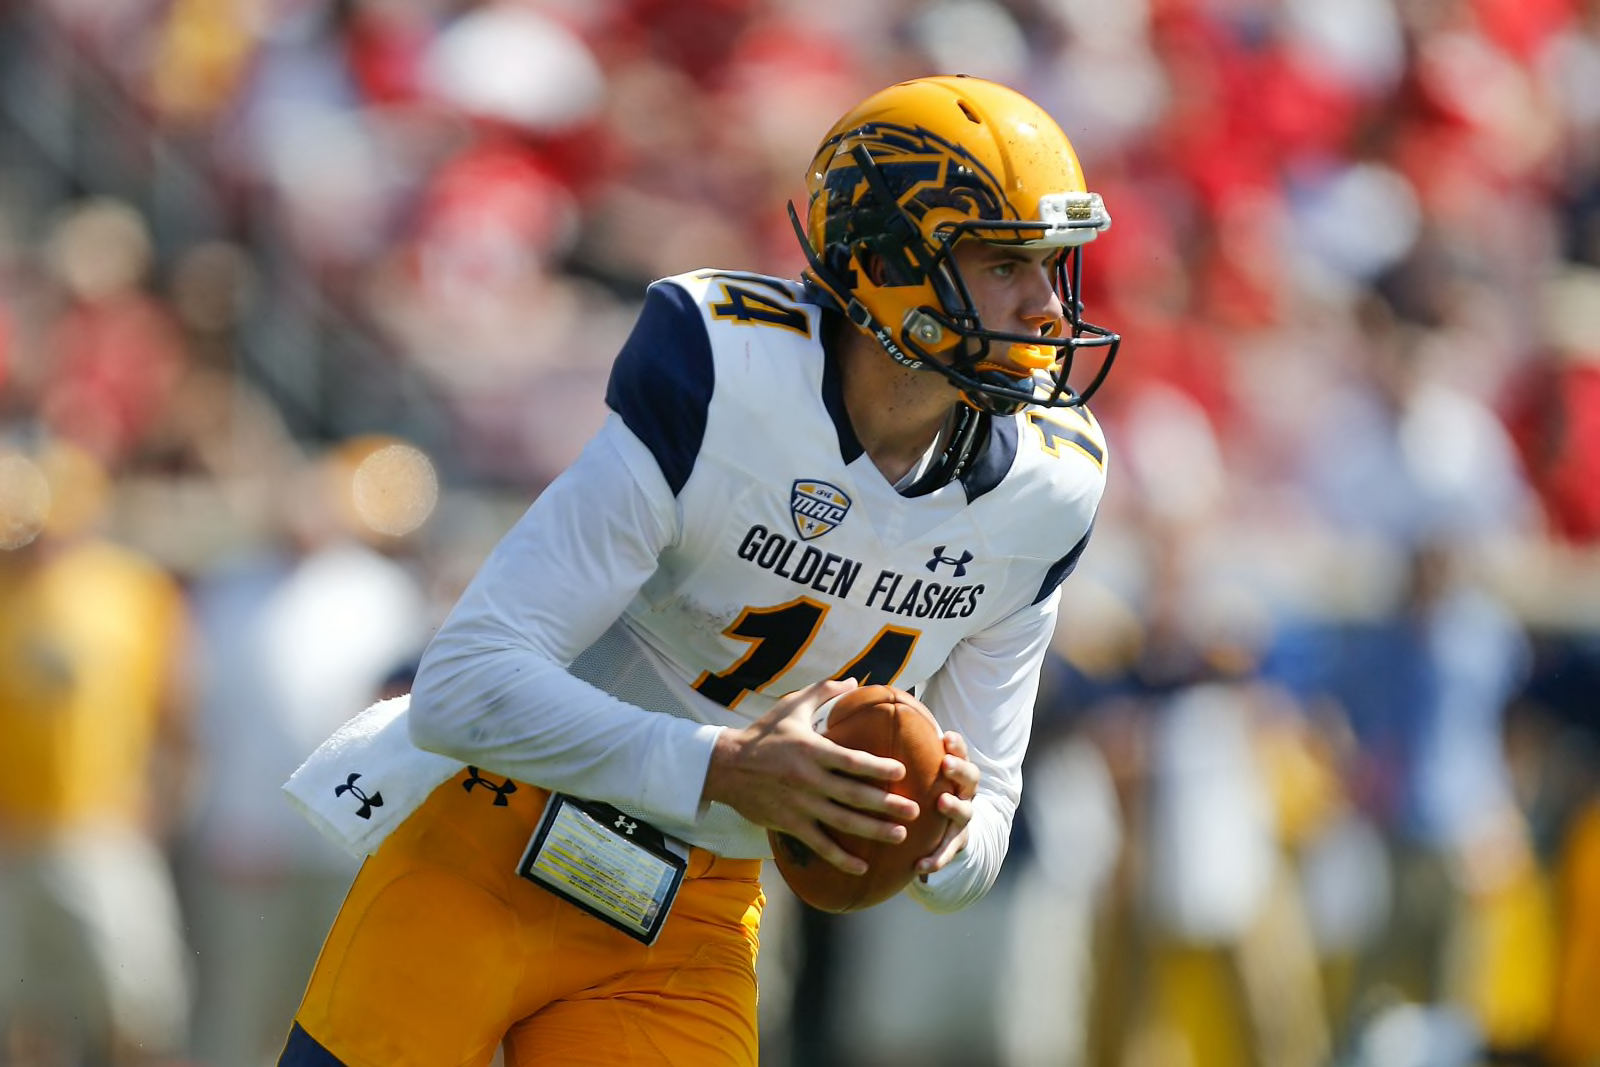 Kent State Football: Golden Flashes look to make program history in